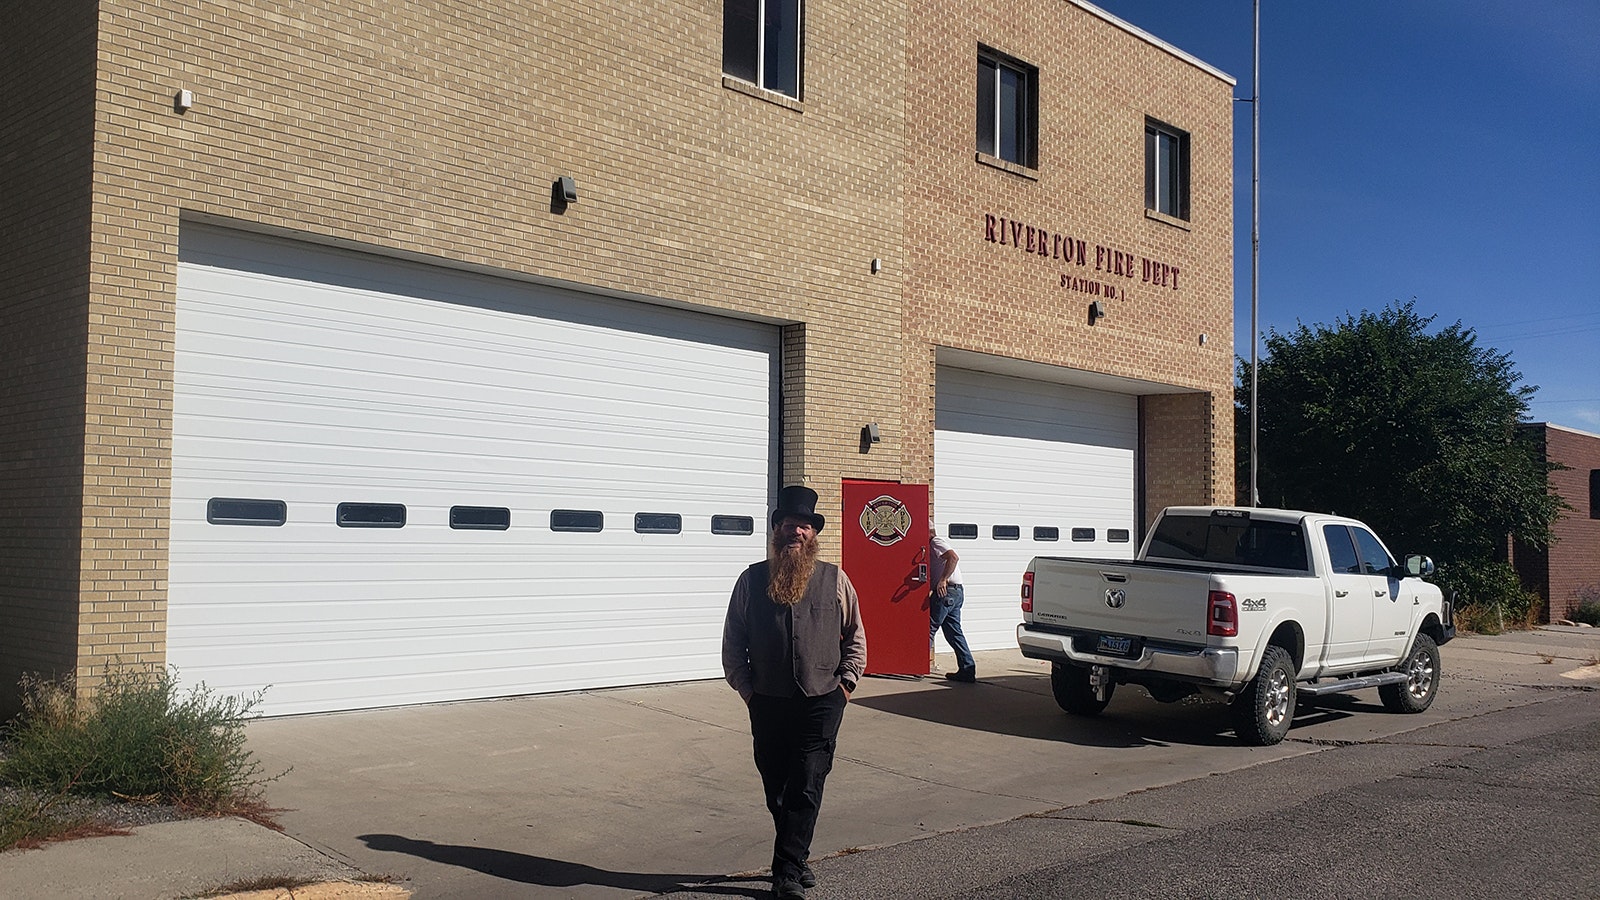 Alma Law poses in front of the Riverton Fire Department, where some report hearing ghostly music.